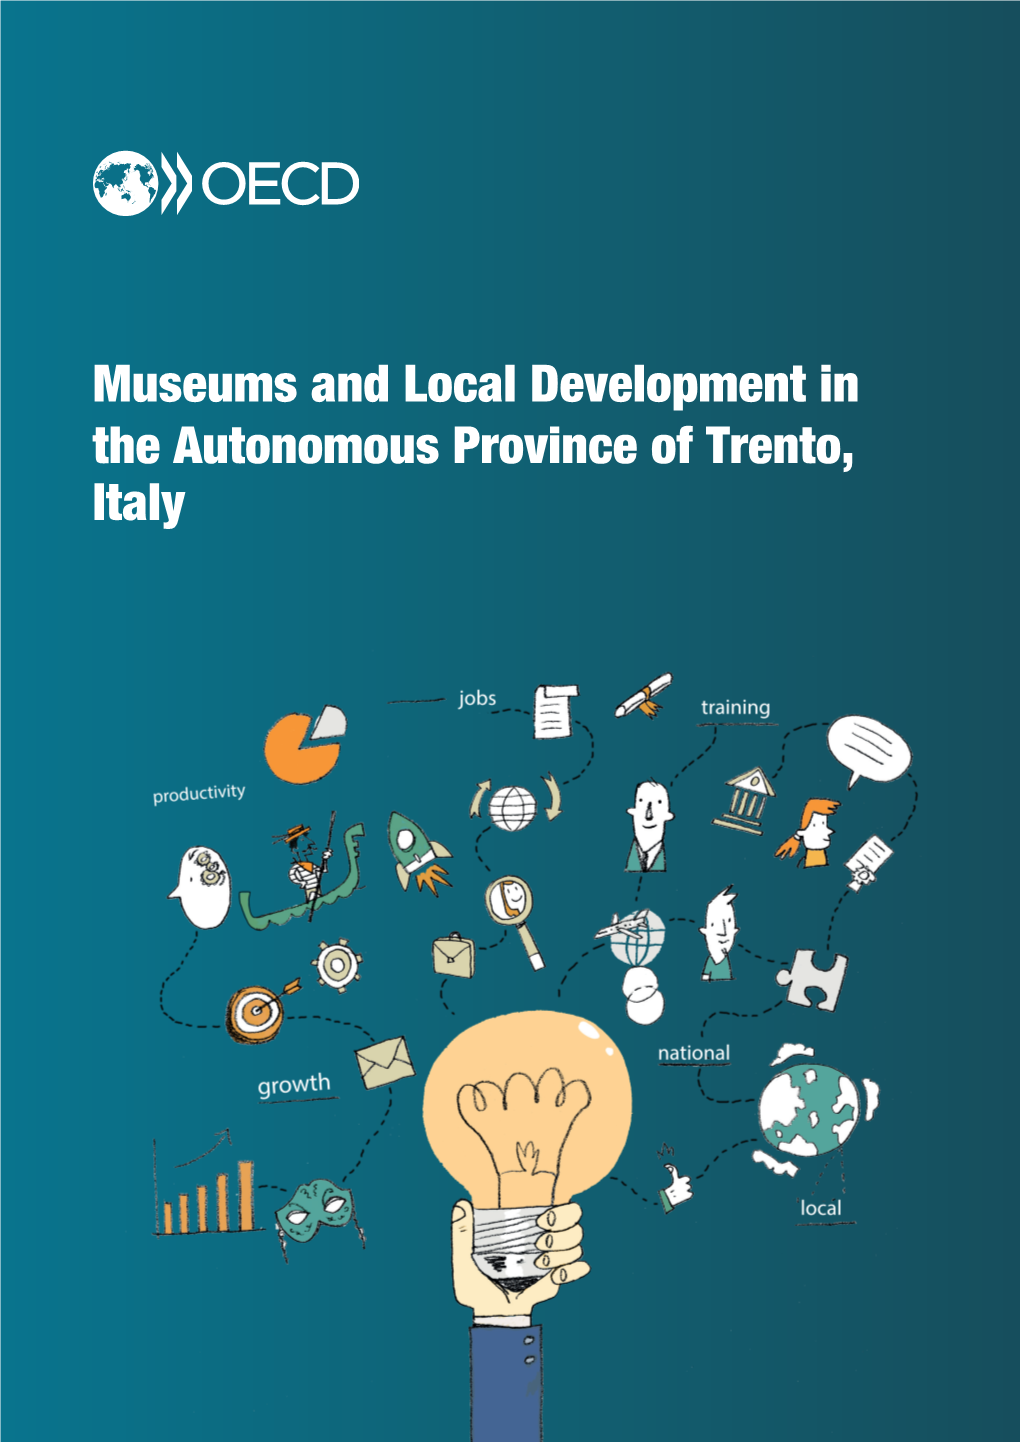 Museums and Local Development in the Autonomous Province of Trento, Italy